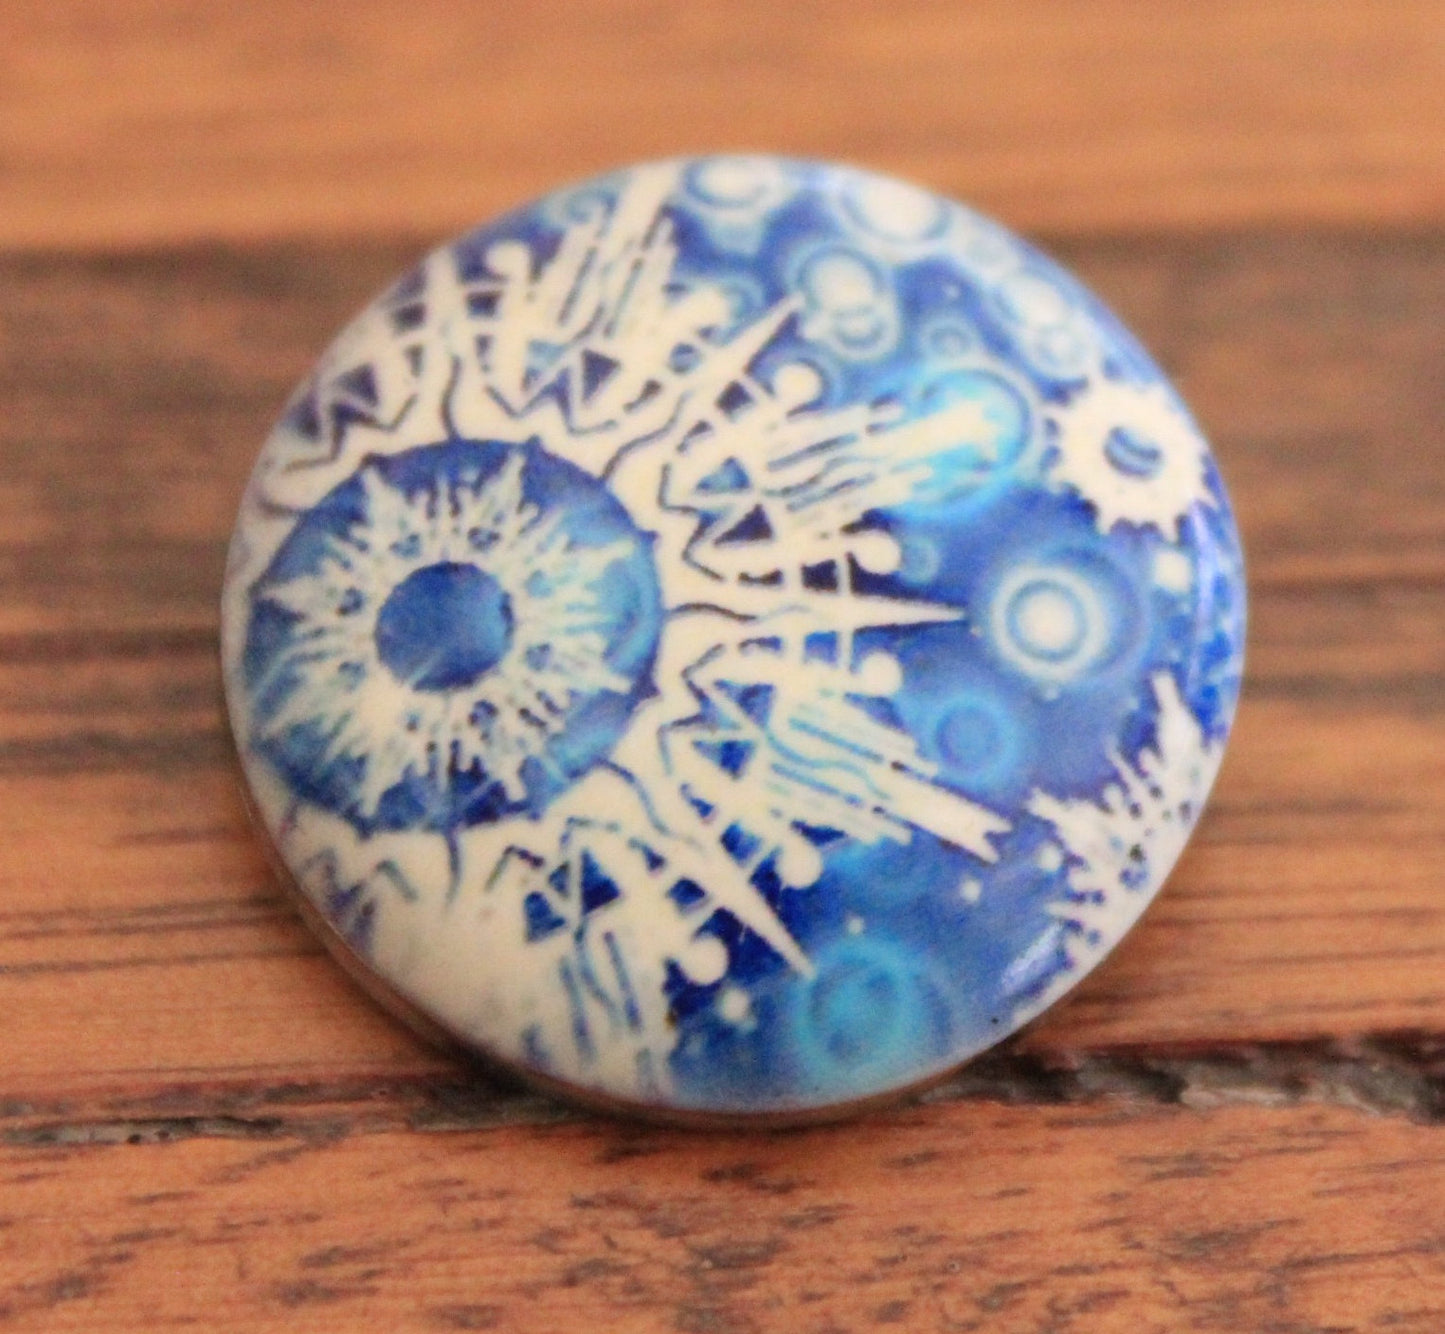 snowflakes pattern in blue painted stone button